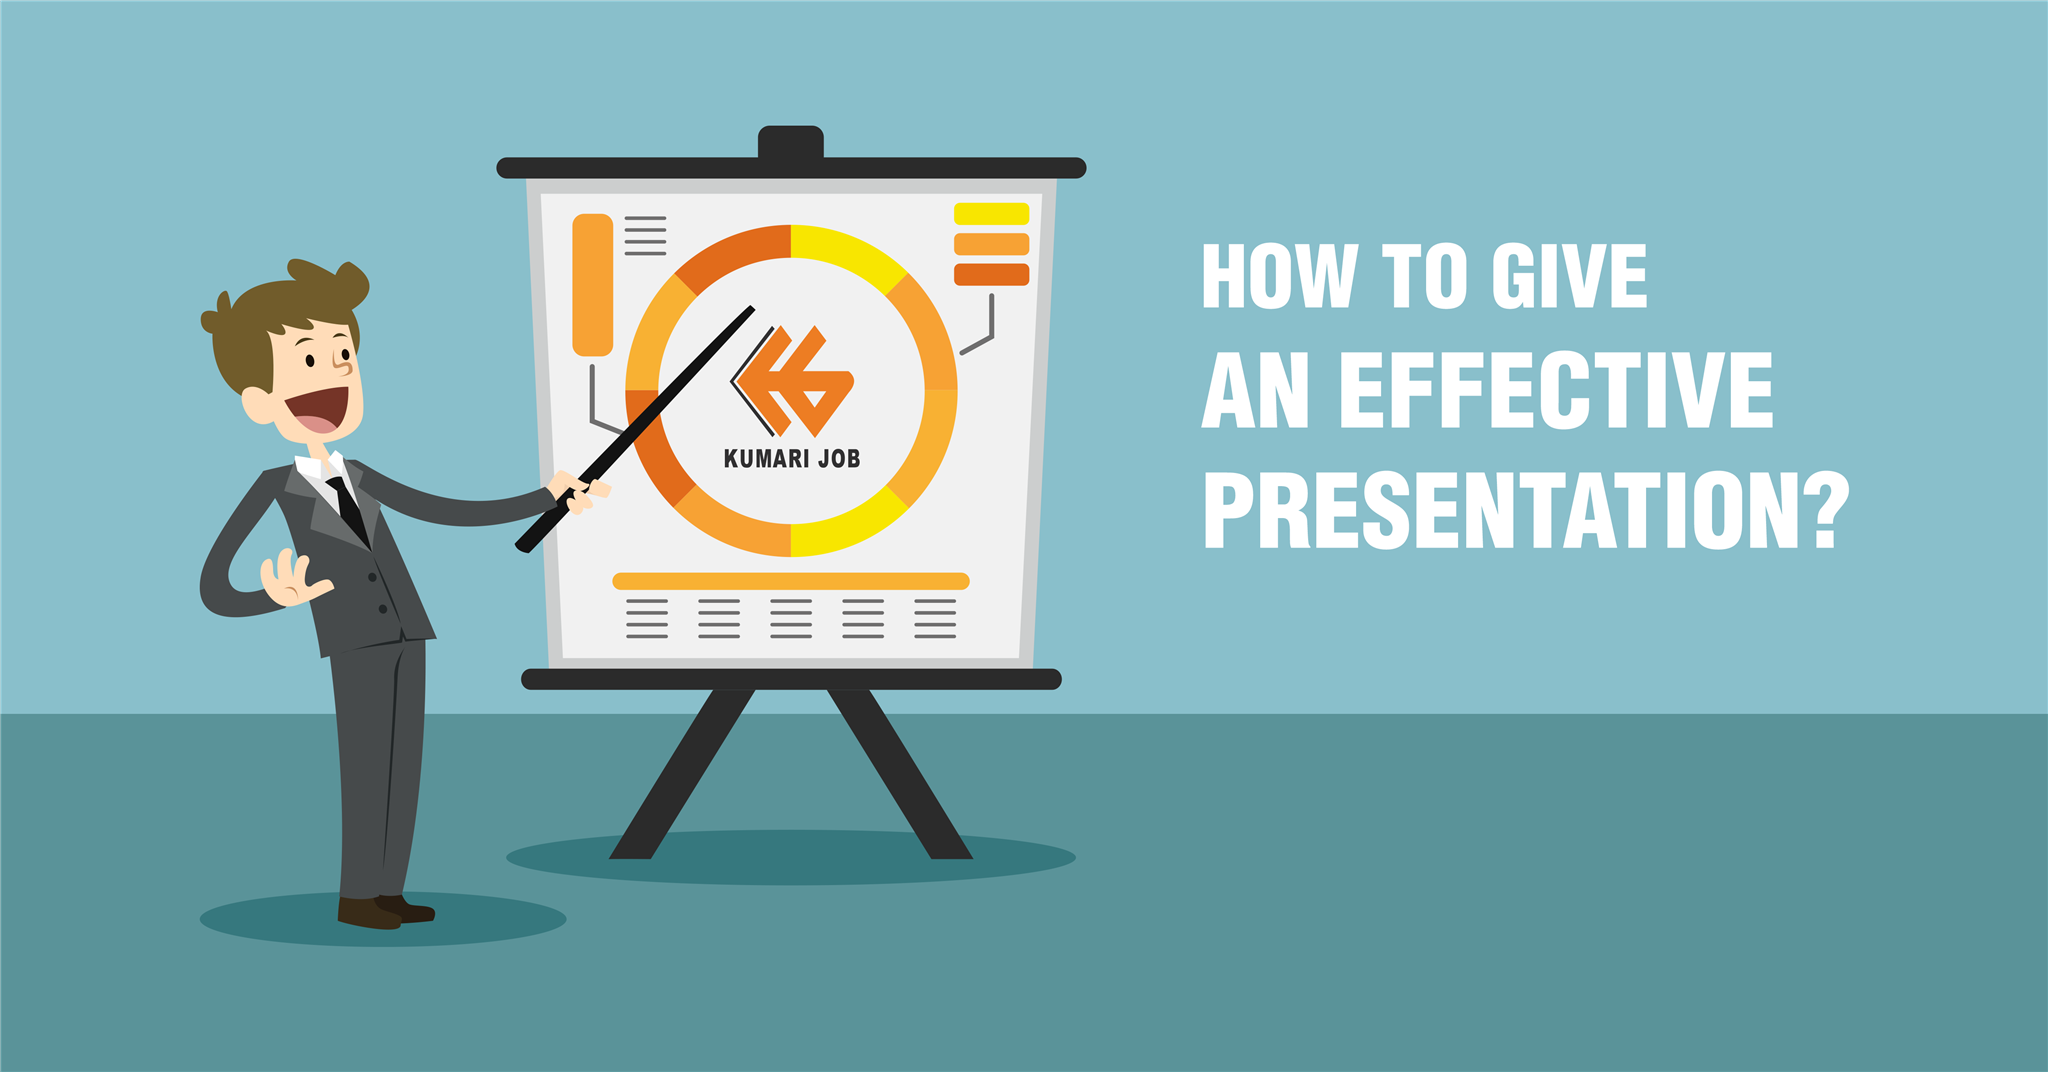 How to presentation. How to make effective presentation. Making effective presentation. How to give an effective presentation. How to give a presentation.